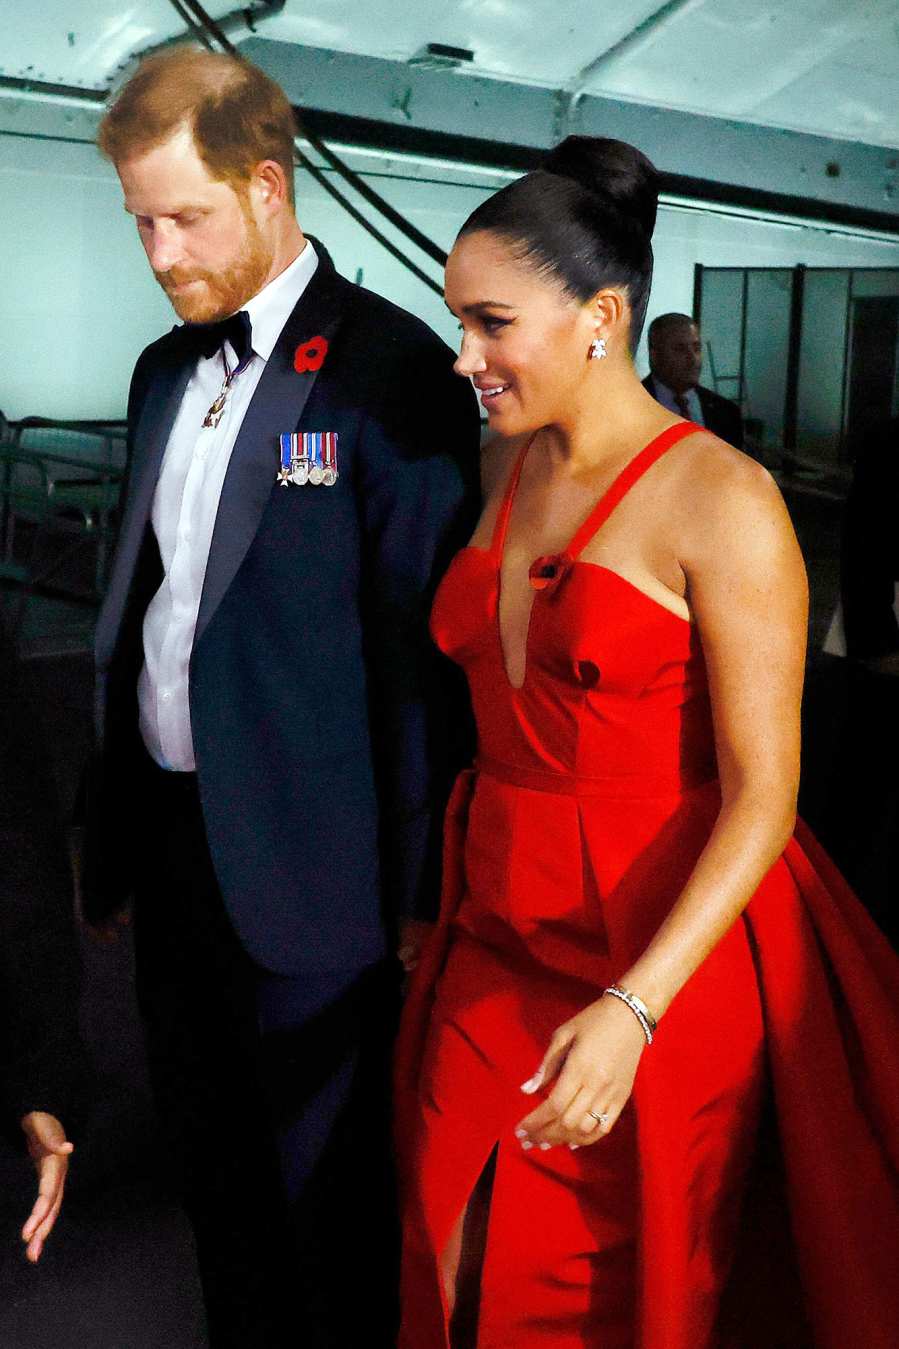 Prince Harry Gives Personal Speech With Meghan Markle by His Side at NYC Gala 3